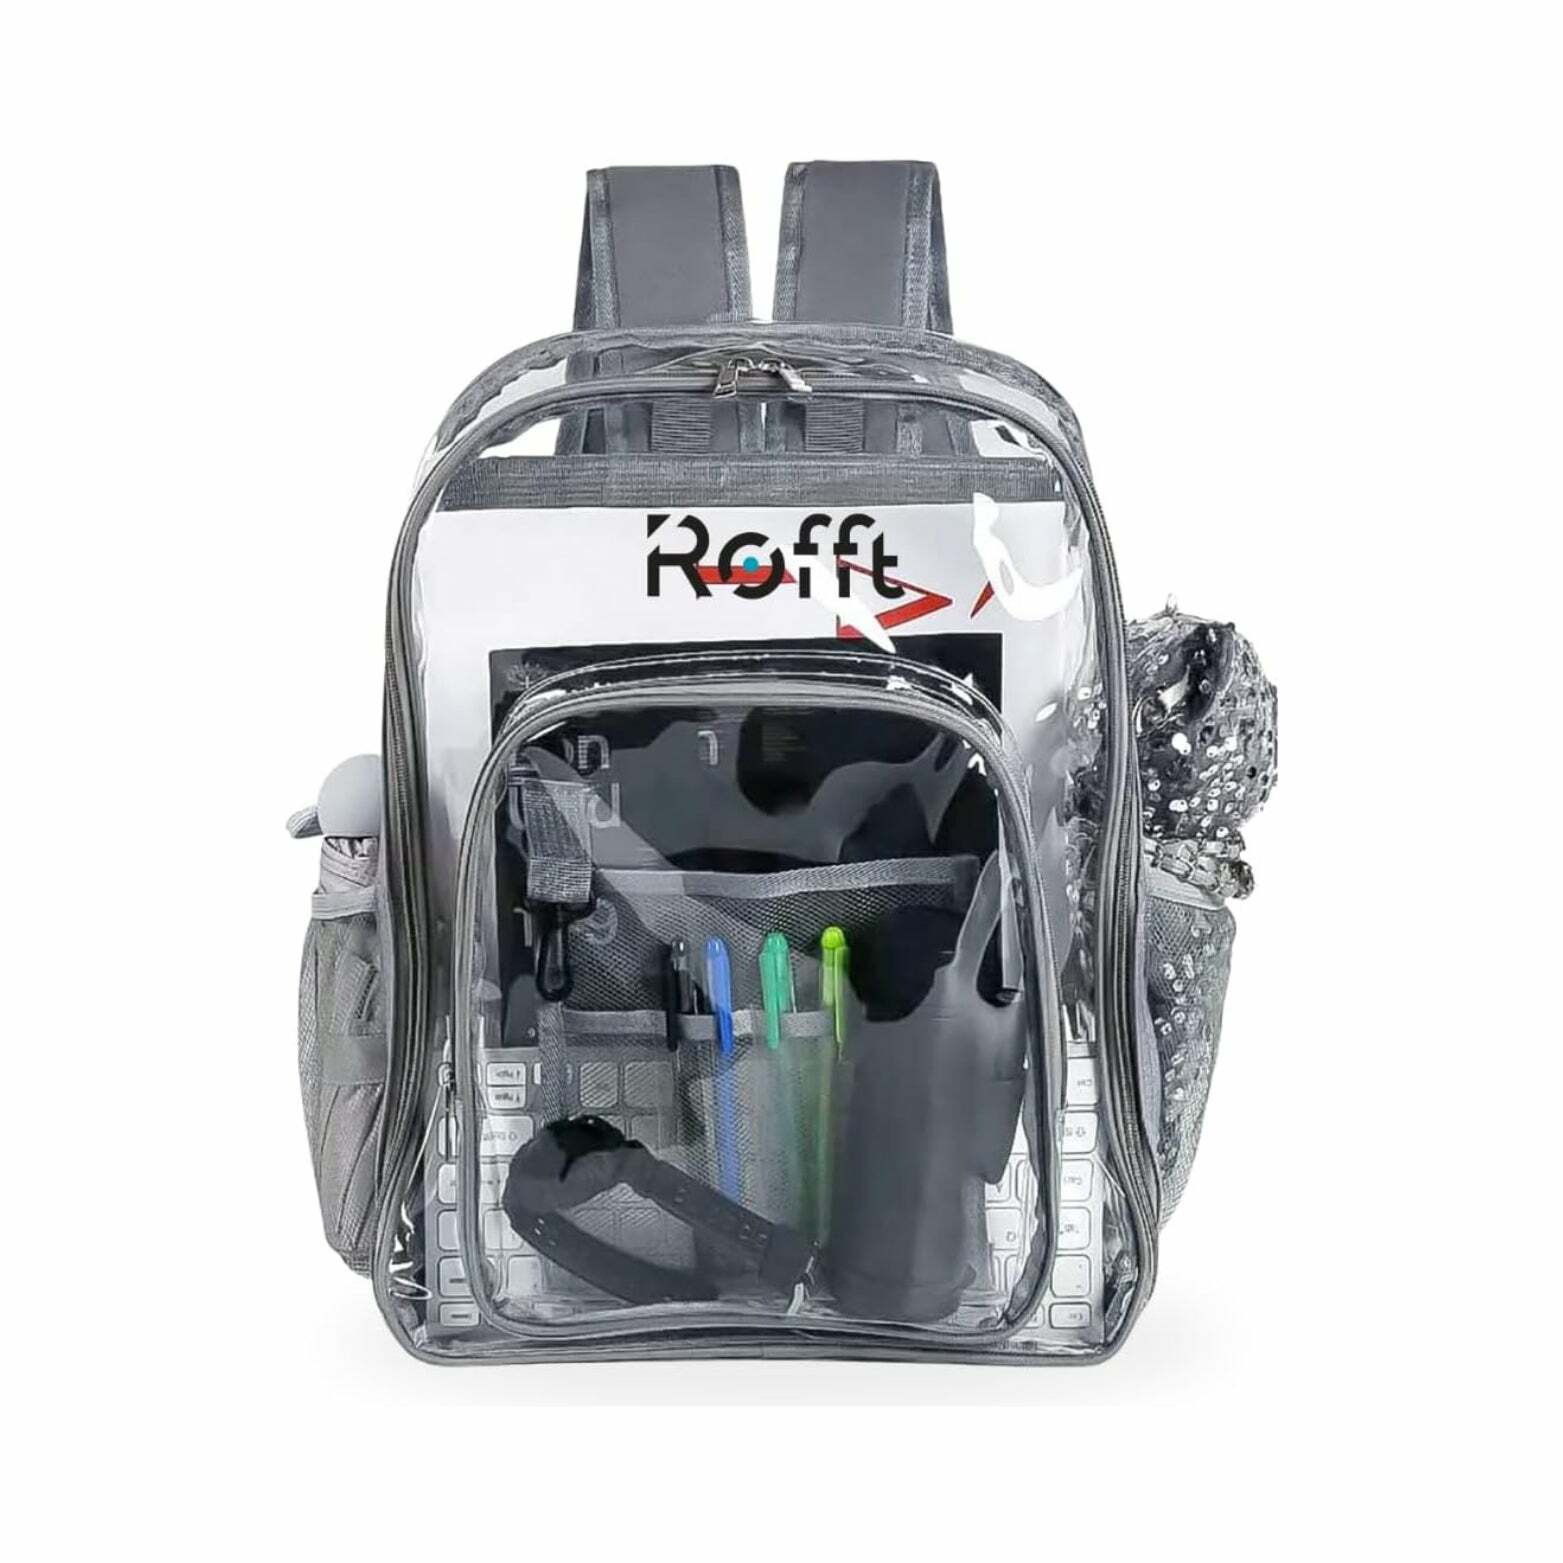 ROFFT Medium Clear Backpack - Durable PVC with Reinforced Straps and Multiple Pockets, Gray